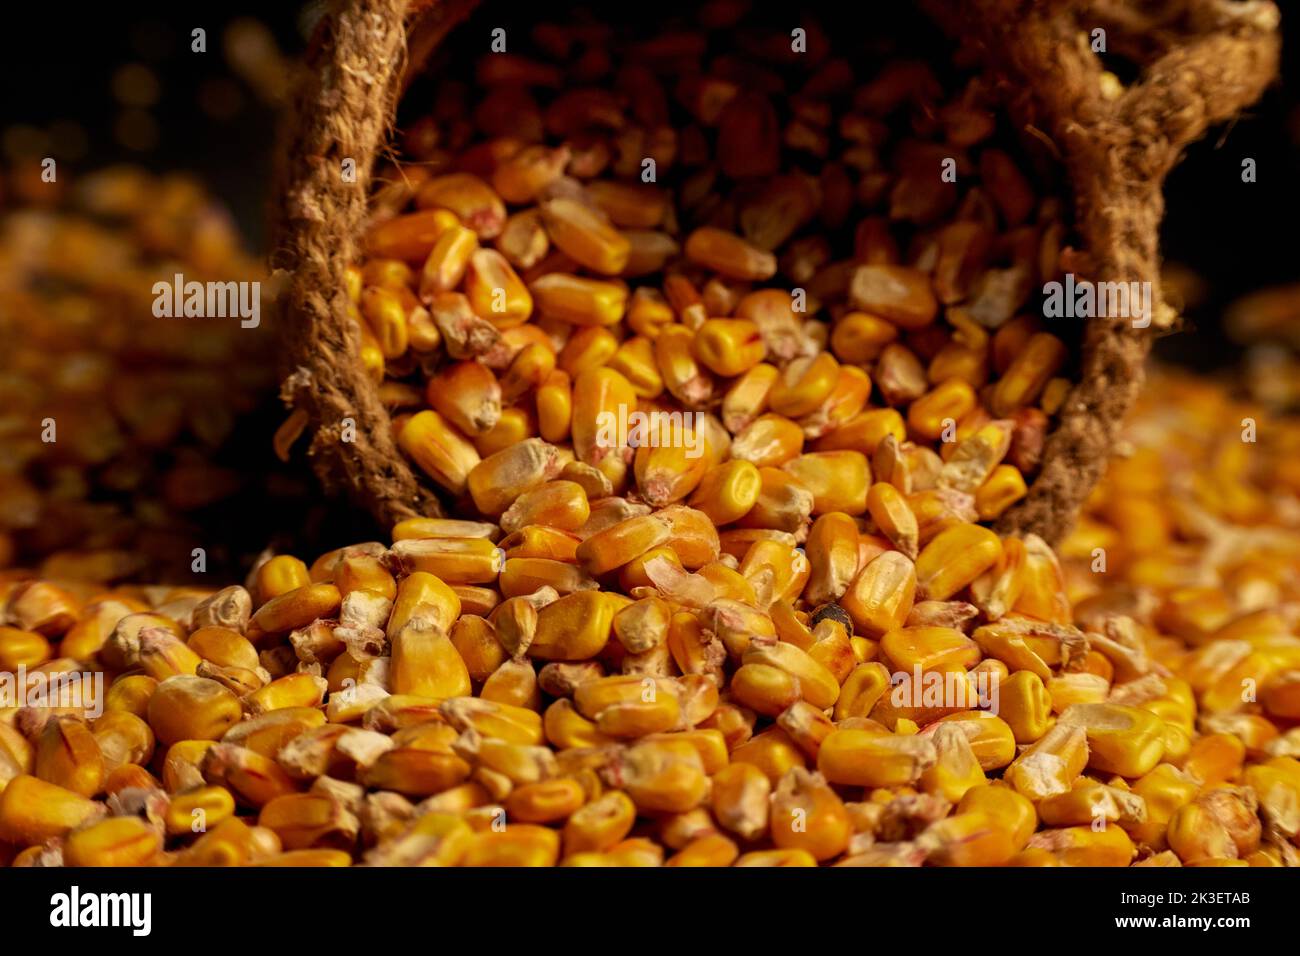 Closeup photo a grains of corn and inverted jute sack and scattered grains around on a dark background Stock Photo